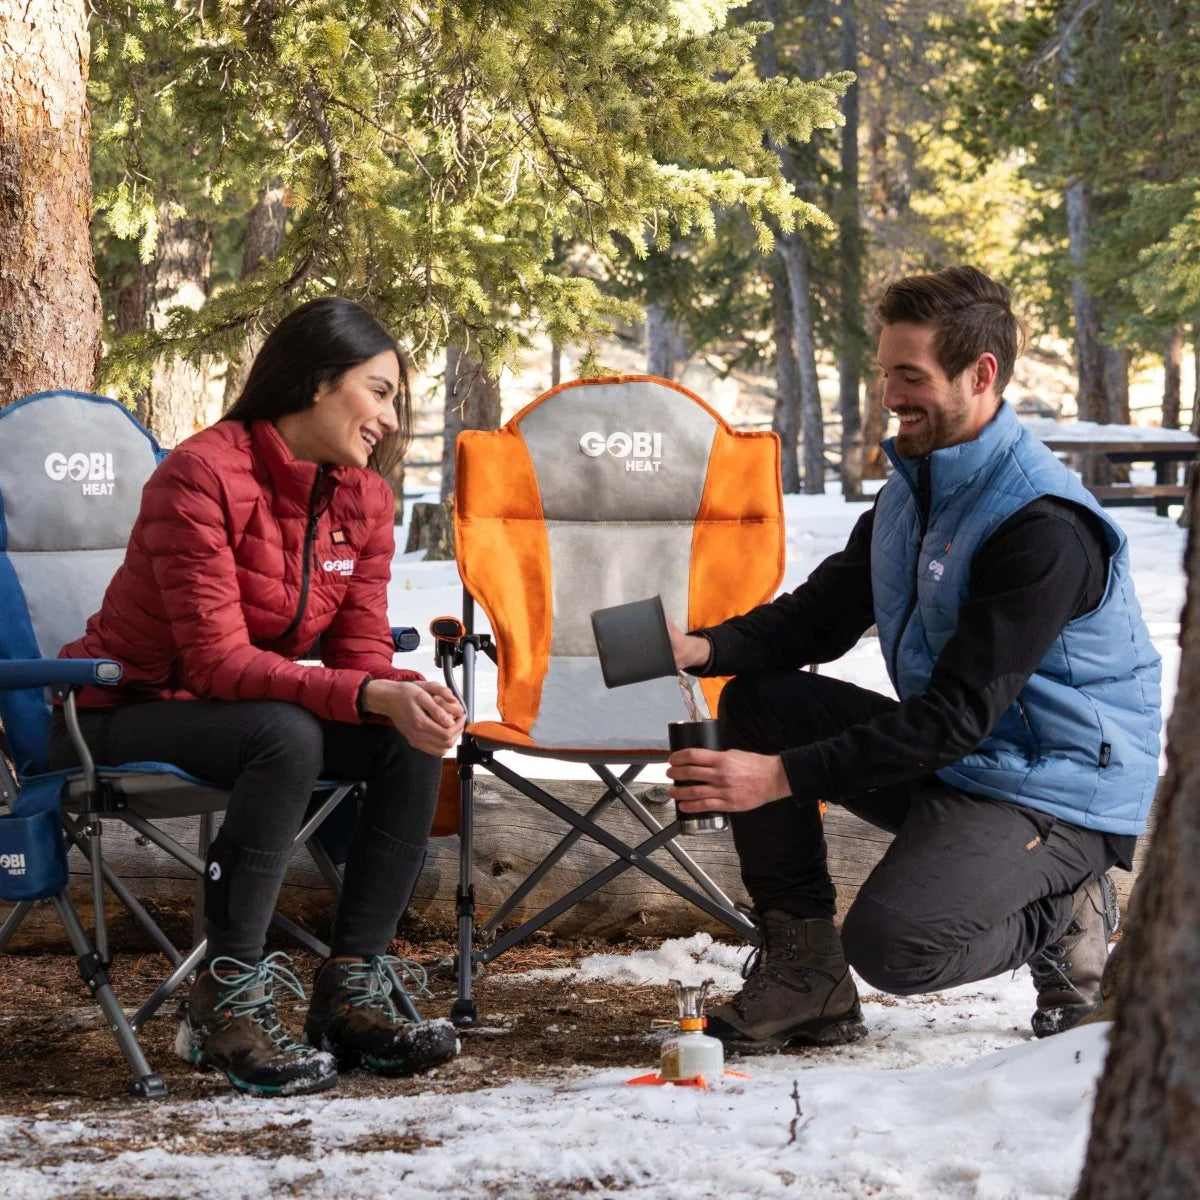 GOBI Heated Camping Chair: A comfortable and innovative outdoor seating solution with built-in heating, providing warmth and relaxation for a cozy camping experience.